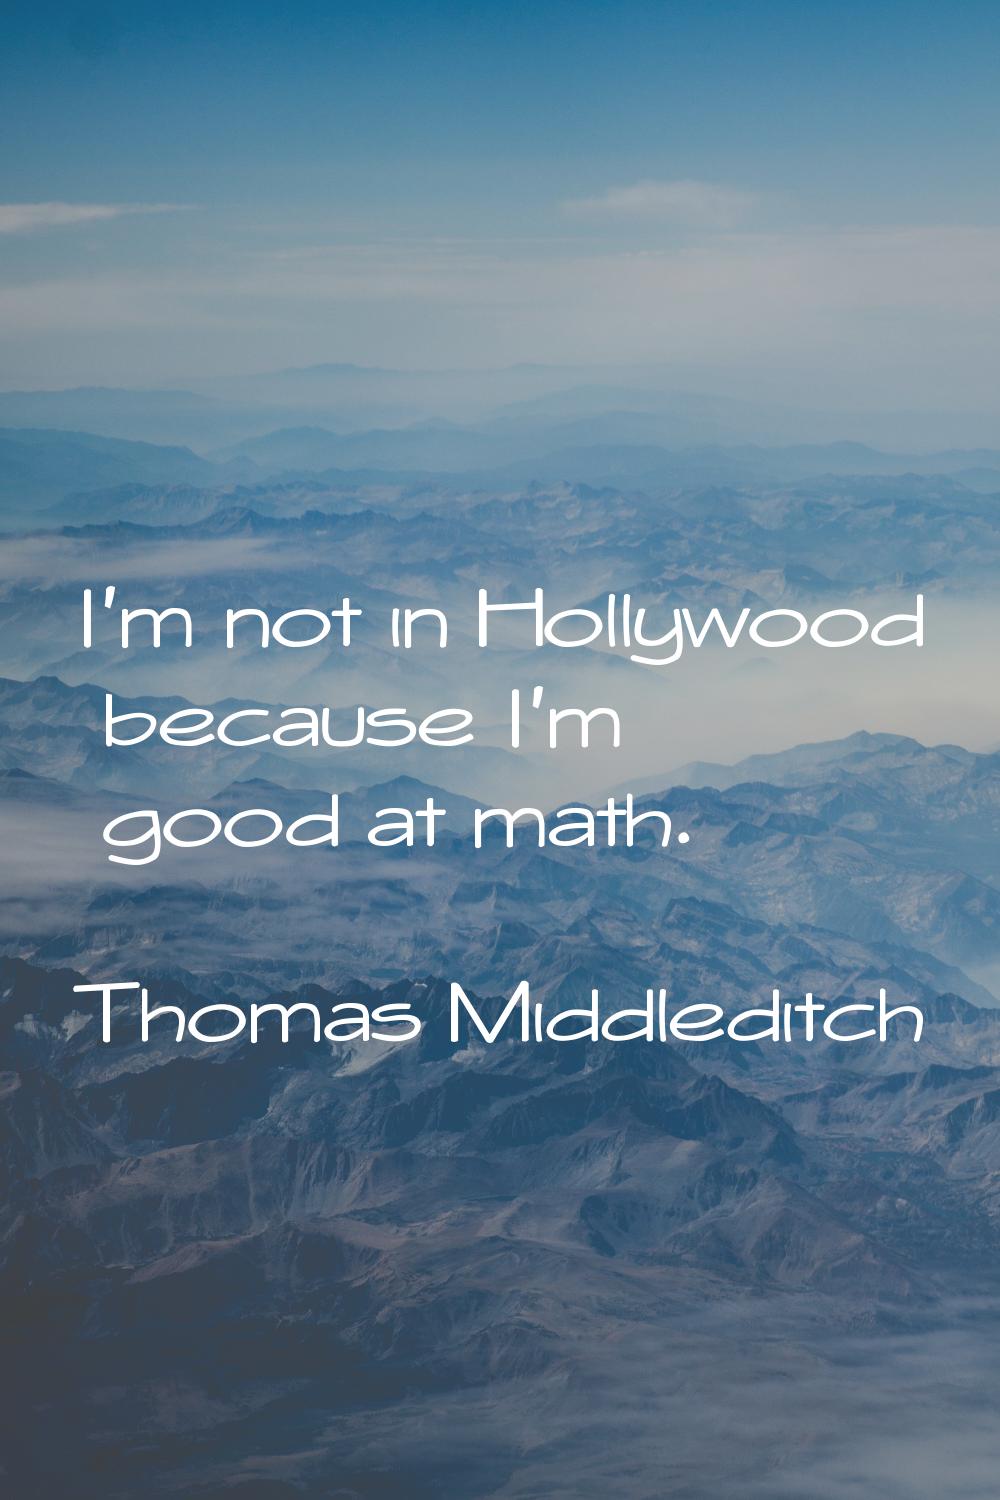 I'm not in Hollywood because I'm good at math.